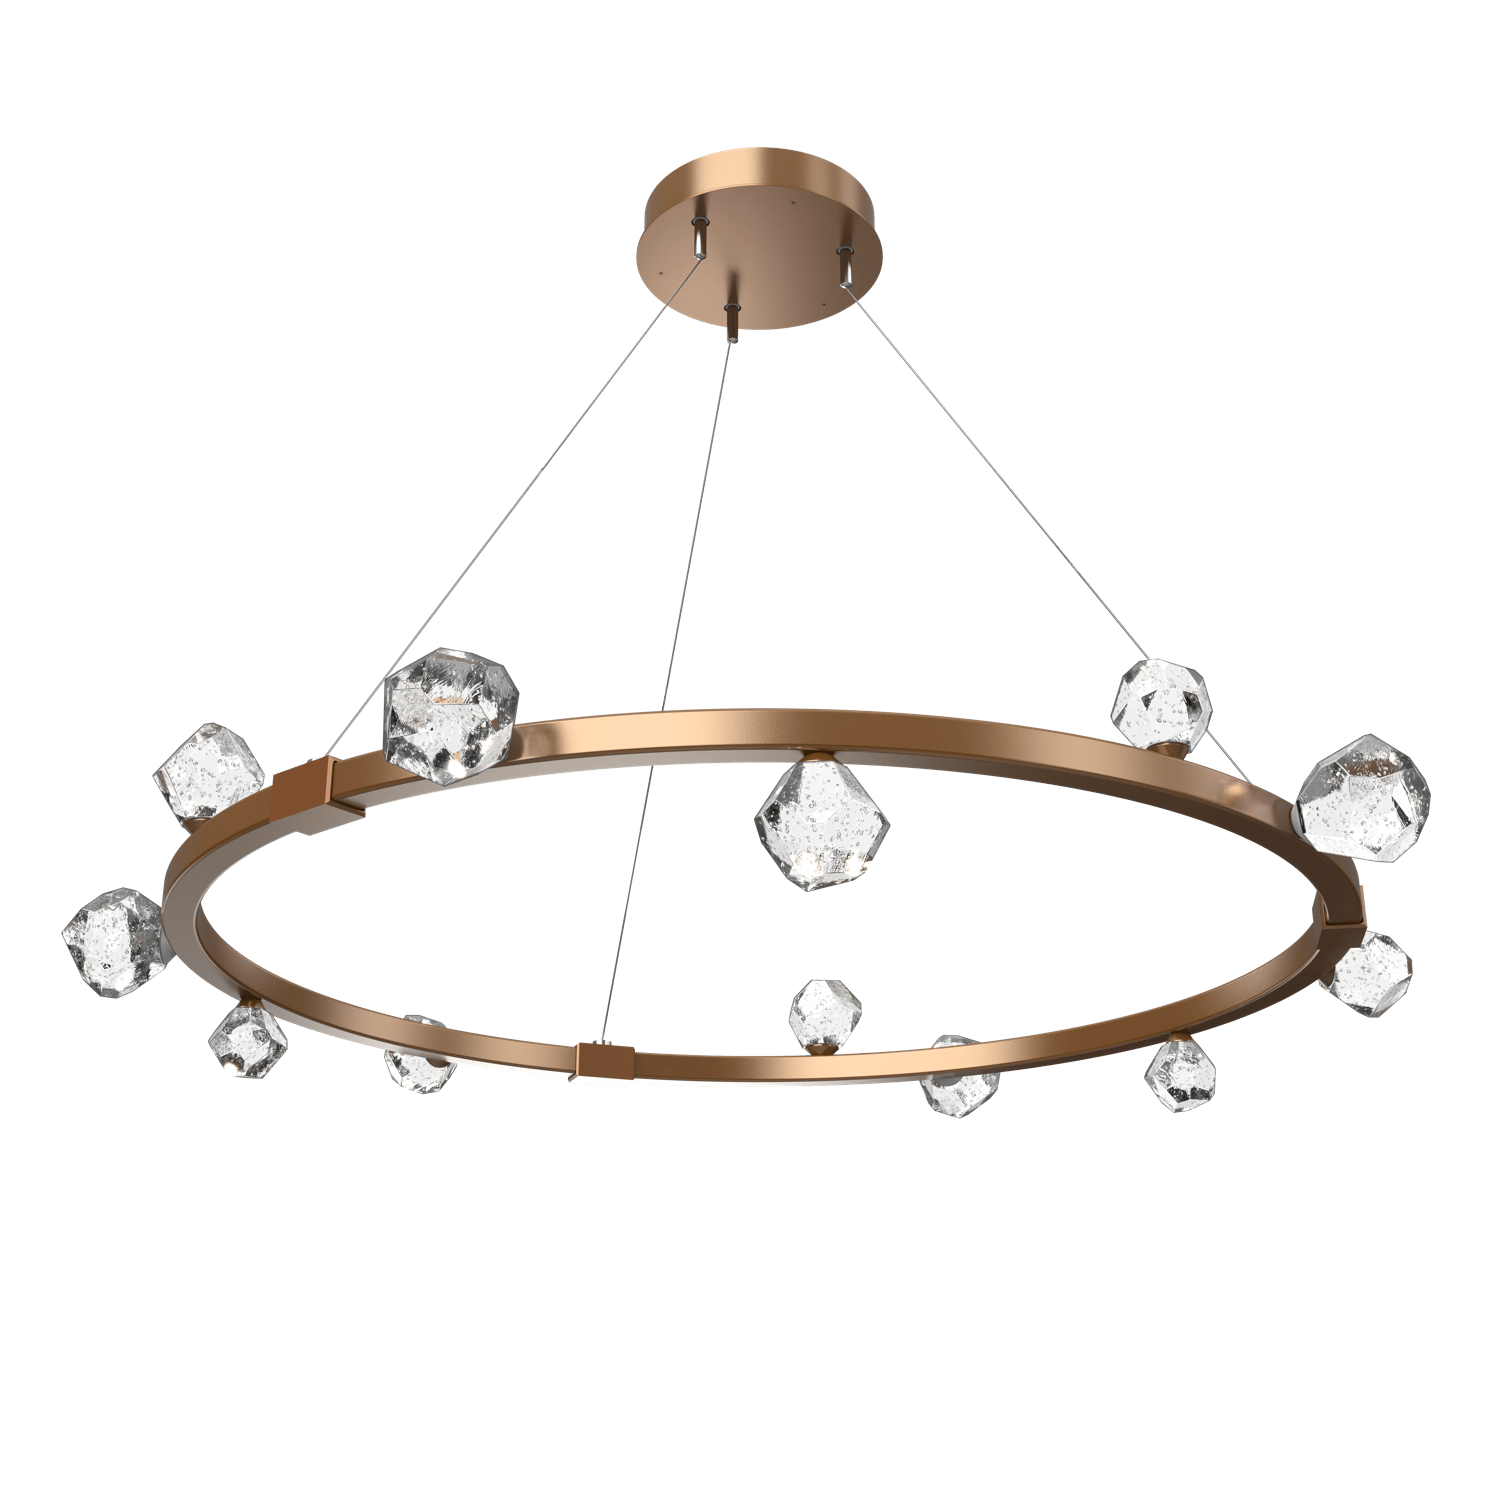 CHB0070-40-NB-Hammerton-Studio-Stella-40-inch-radial-ring-chandelier-with-novel-brass-finish-and-clear-cast-glass-shades-and-LED-lamping